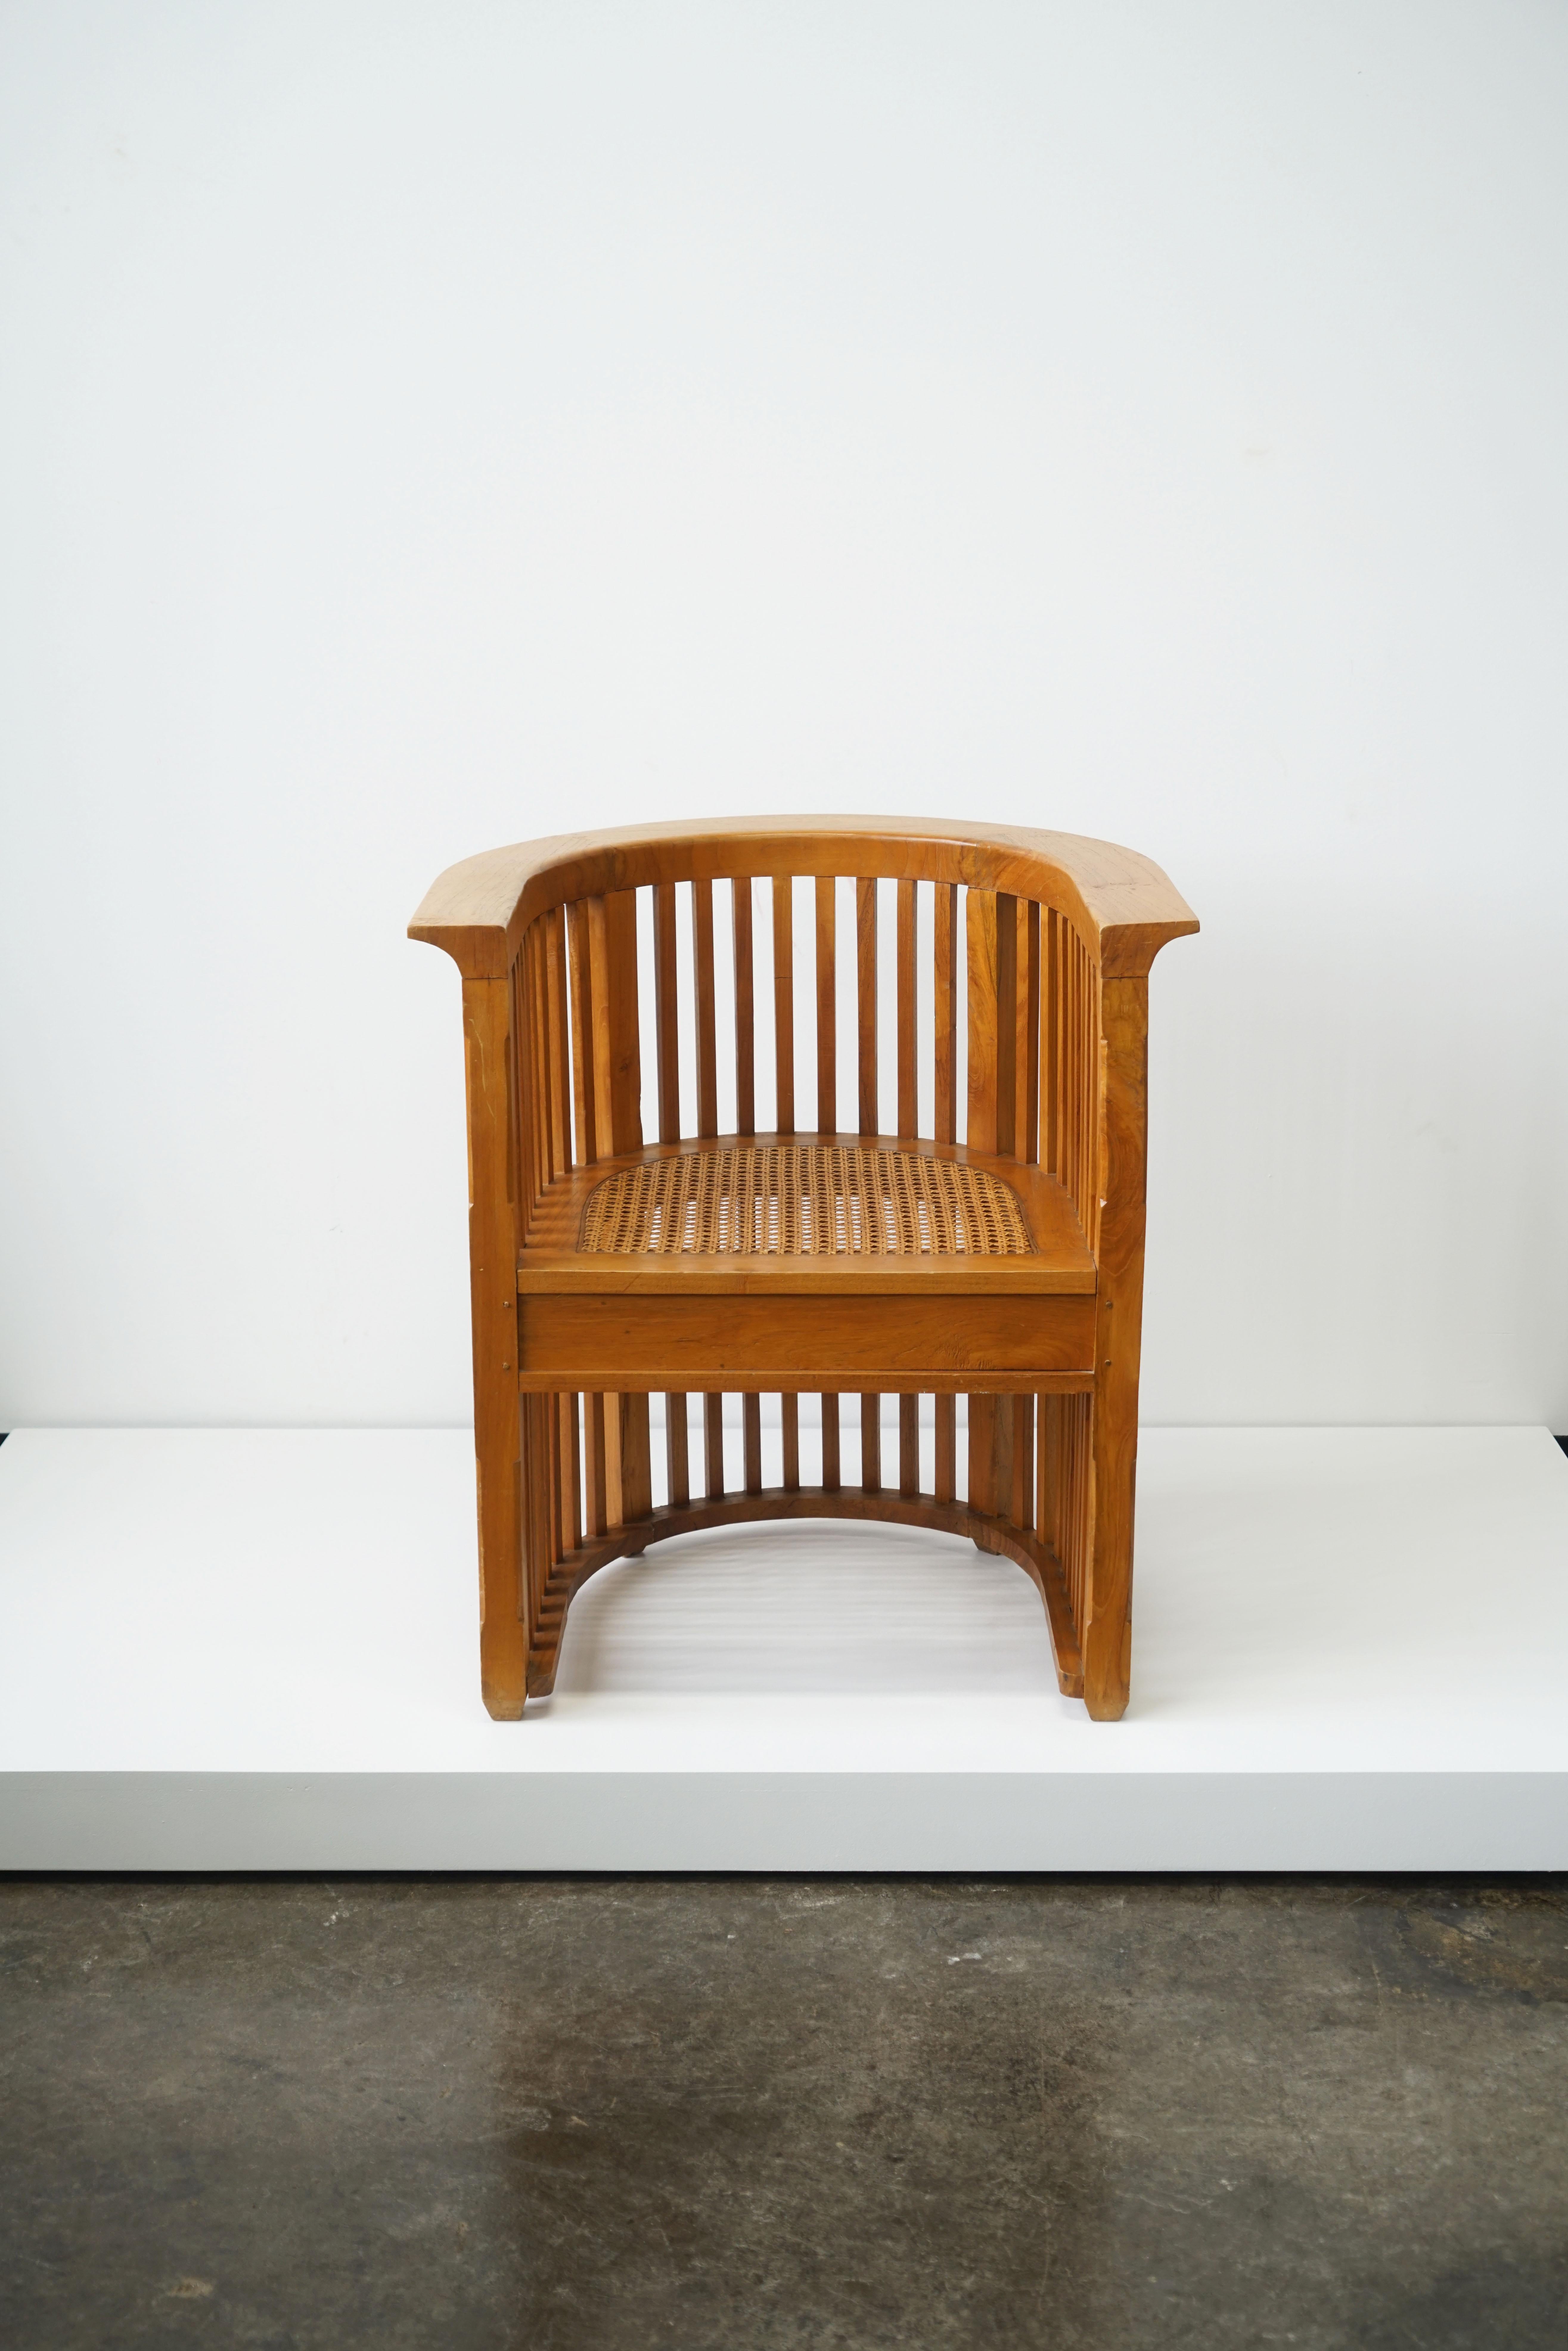 A solid teak wood barrel chair, in the manner of Josef Hoffmann.
With cane seat.

Measures: 28